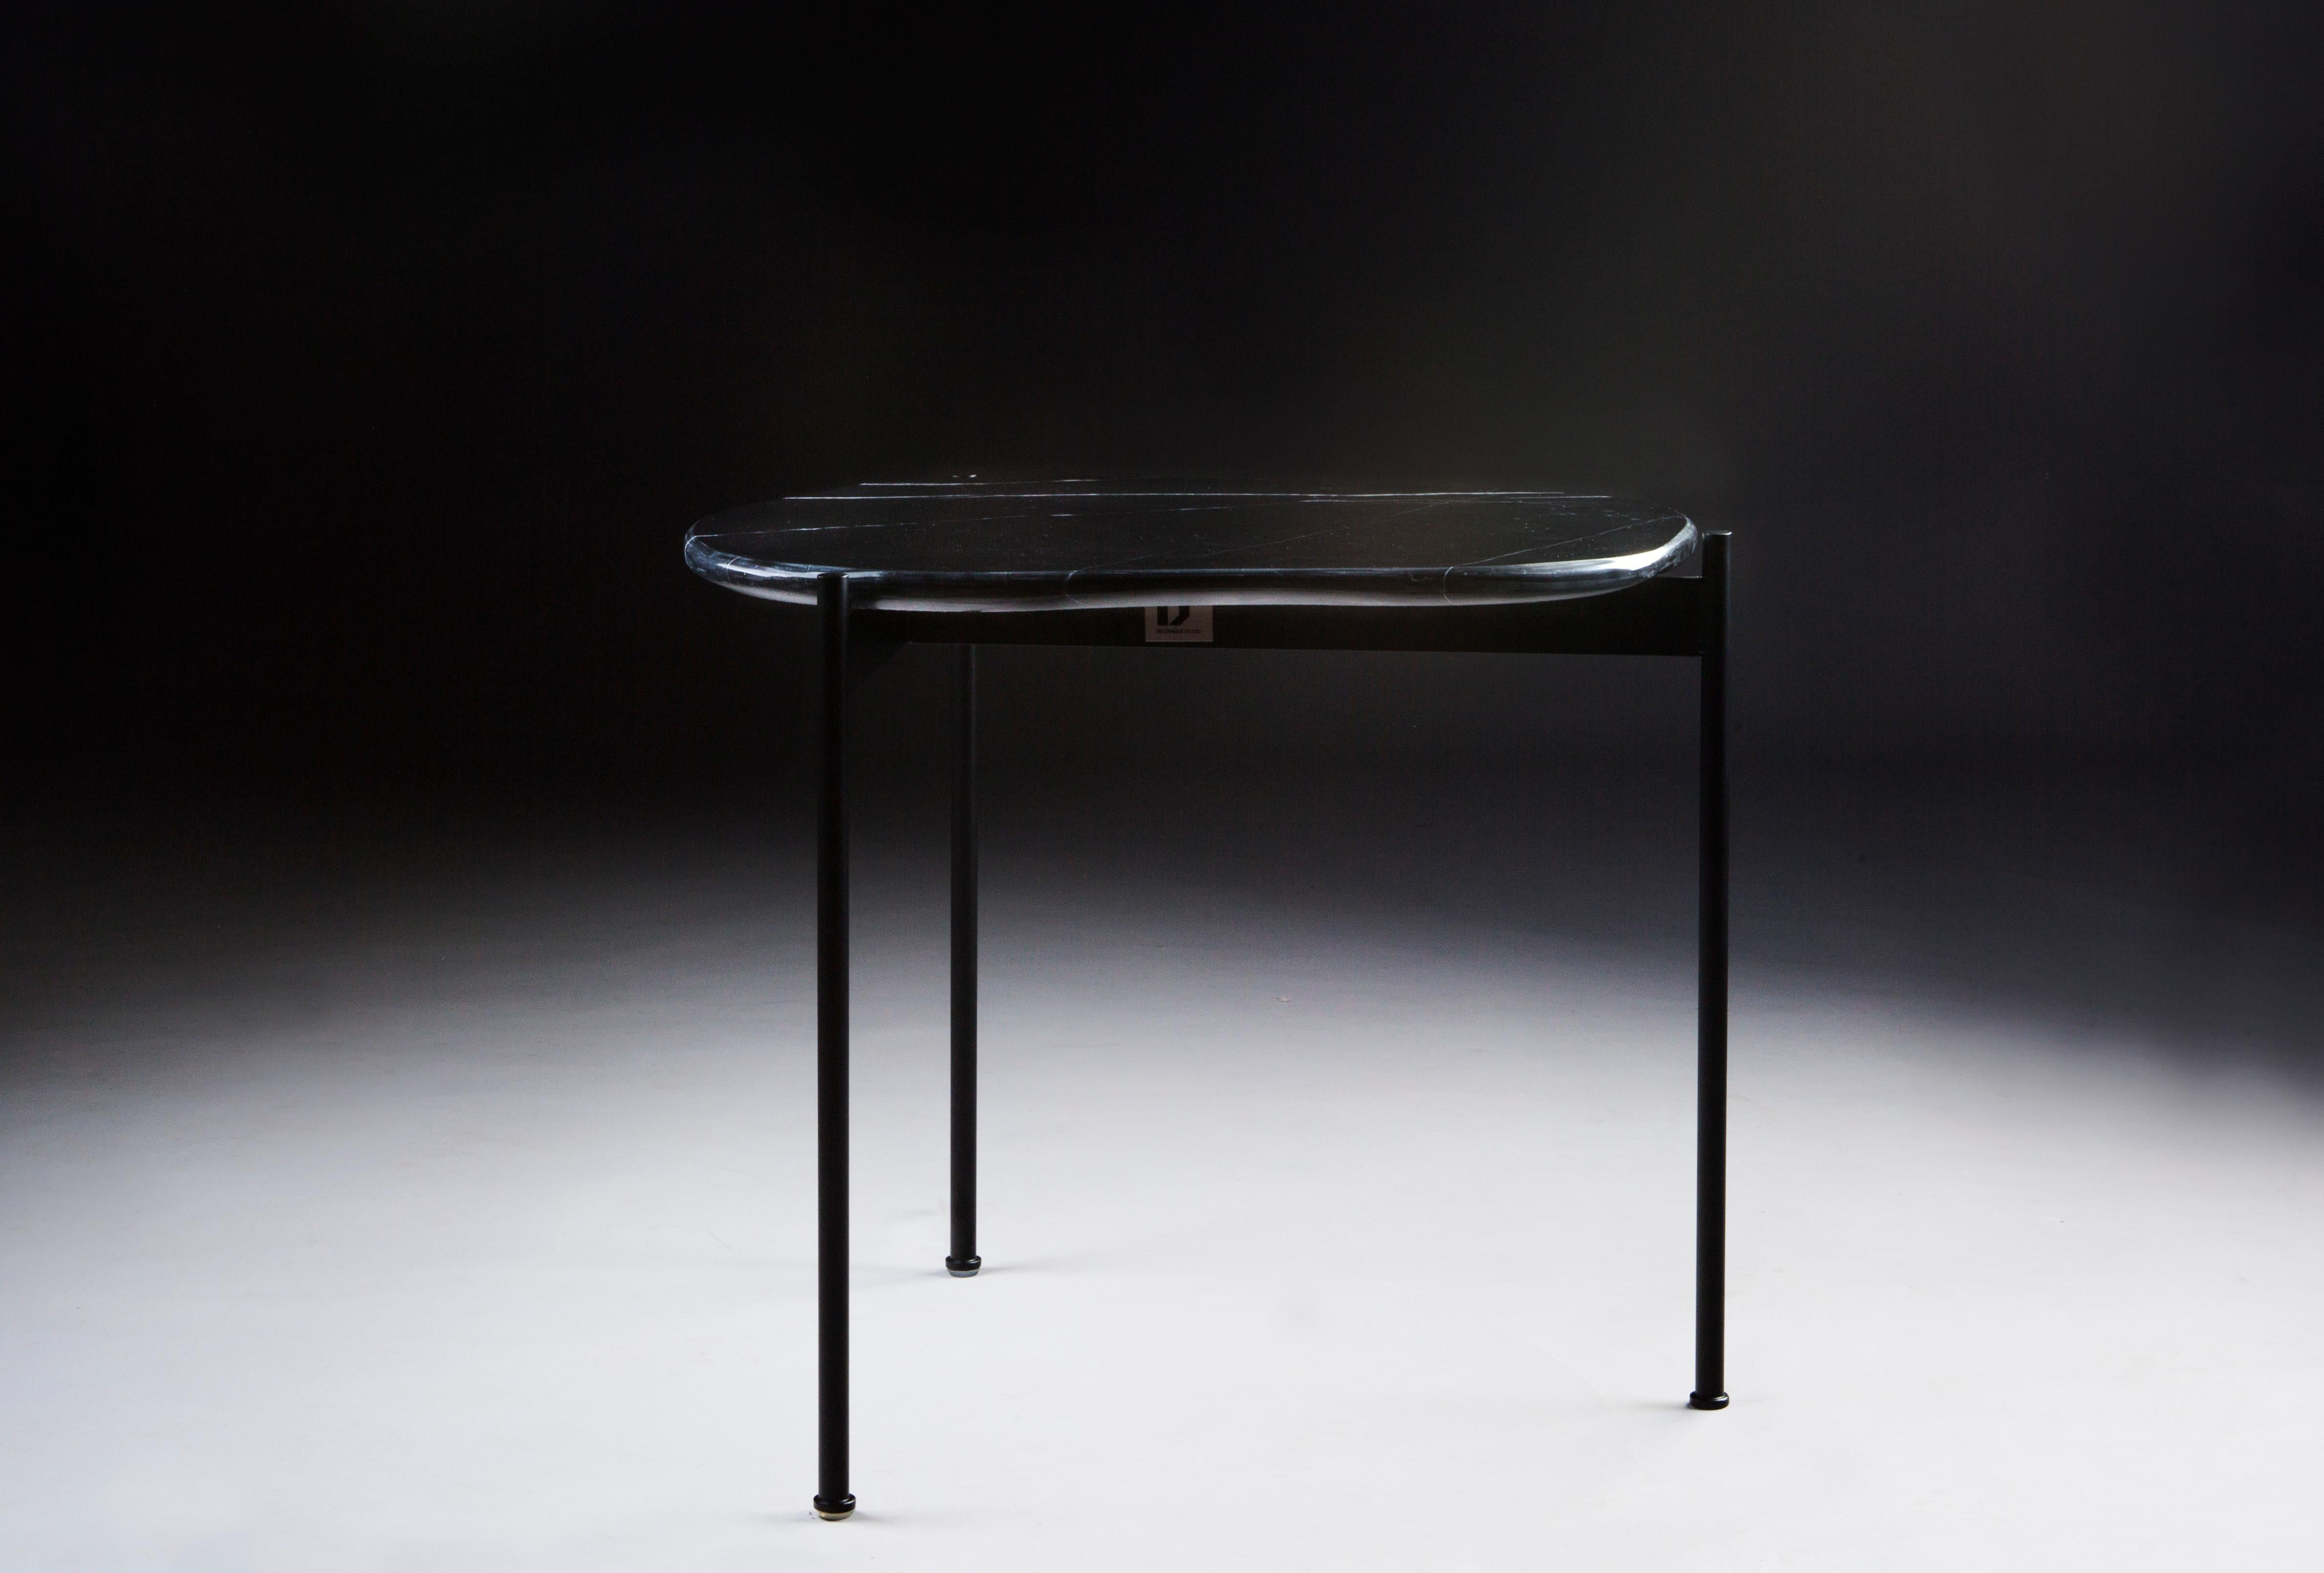 Tas coffee table by Rectangle Studio
Dimensions: W 44 x D 52 x H 45 cm 
Materials: Black marble, black paint coating on metal

We produced 'Tas02' which is inspired by the stones that are shaped by nature and with its free form.
On every